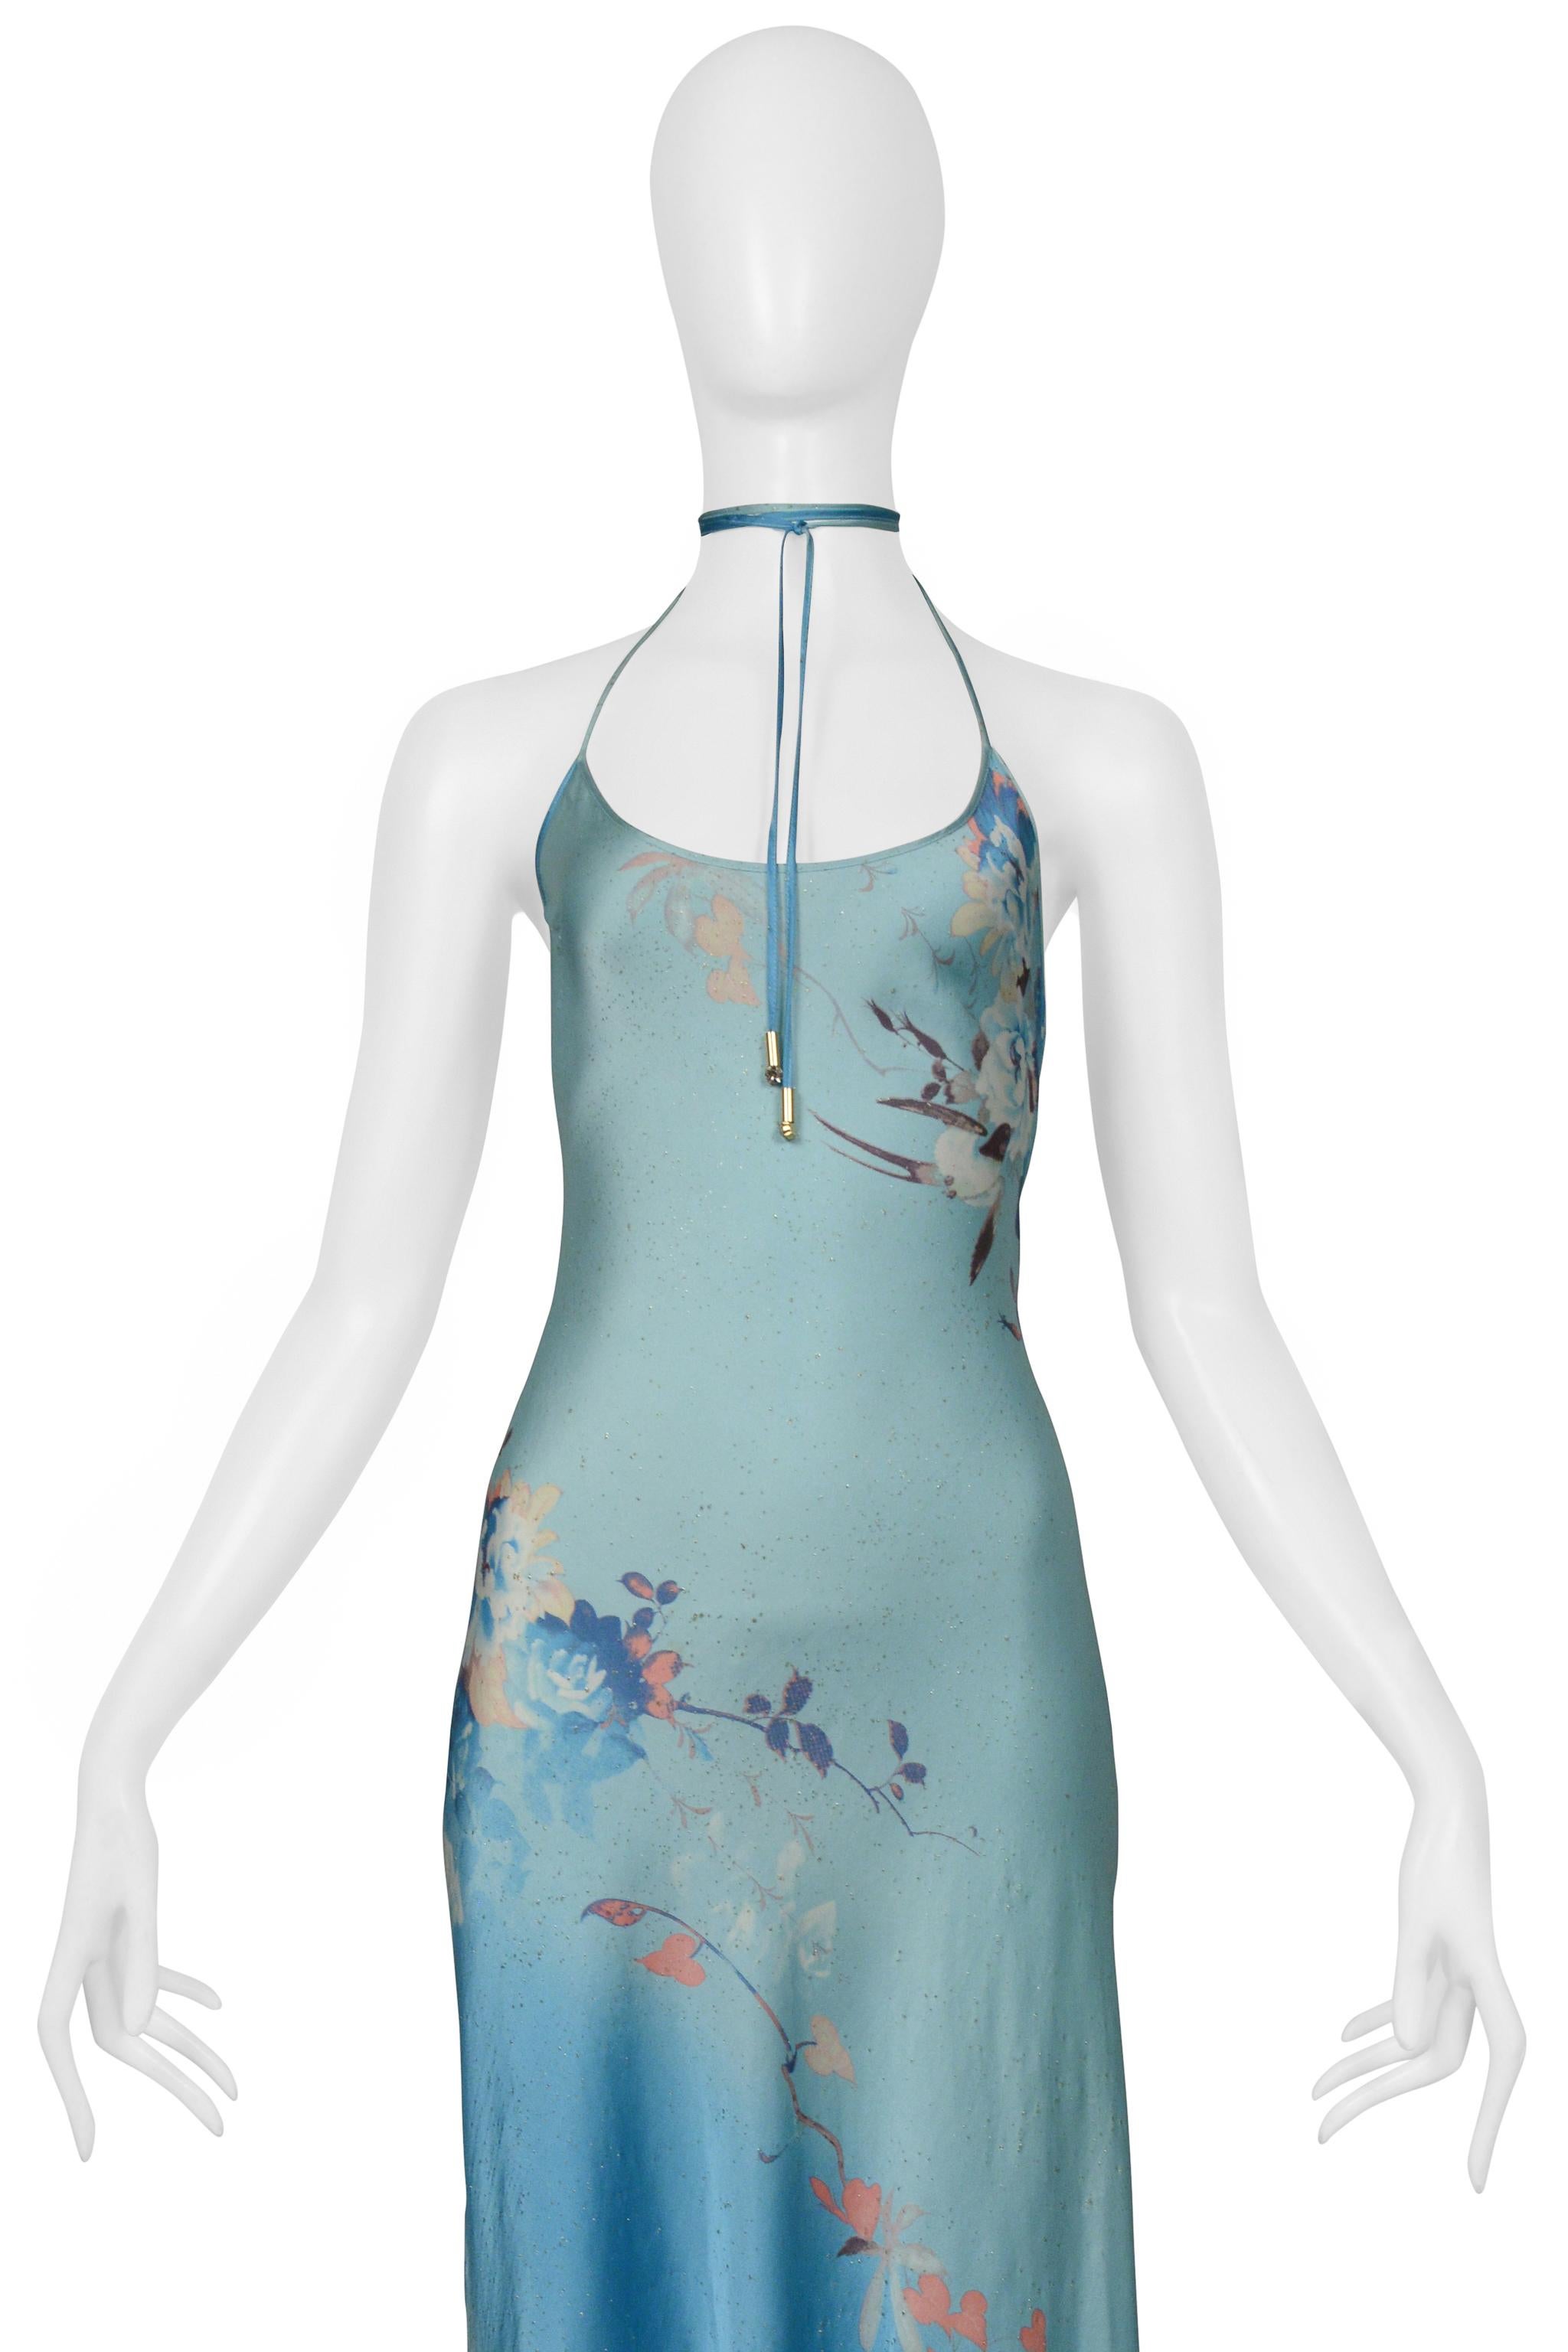 Resurrection Vintage is thrilled to present an exclusive vintage Roberto Cavalli blue slip dress. This exquisite piece showcases a decorative floral pattern with gold metallic flecks, and boasts an exposed back, tie closure with gold beads and clear